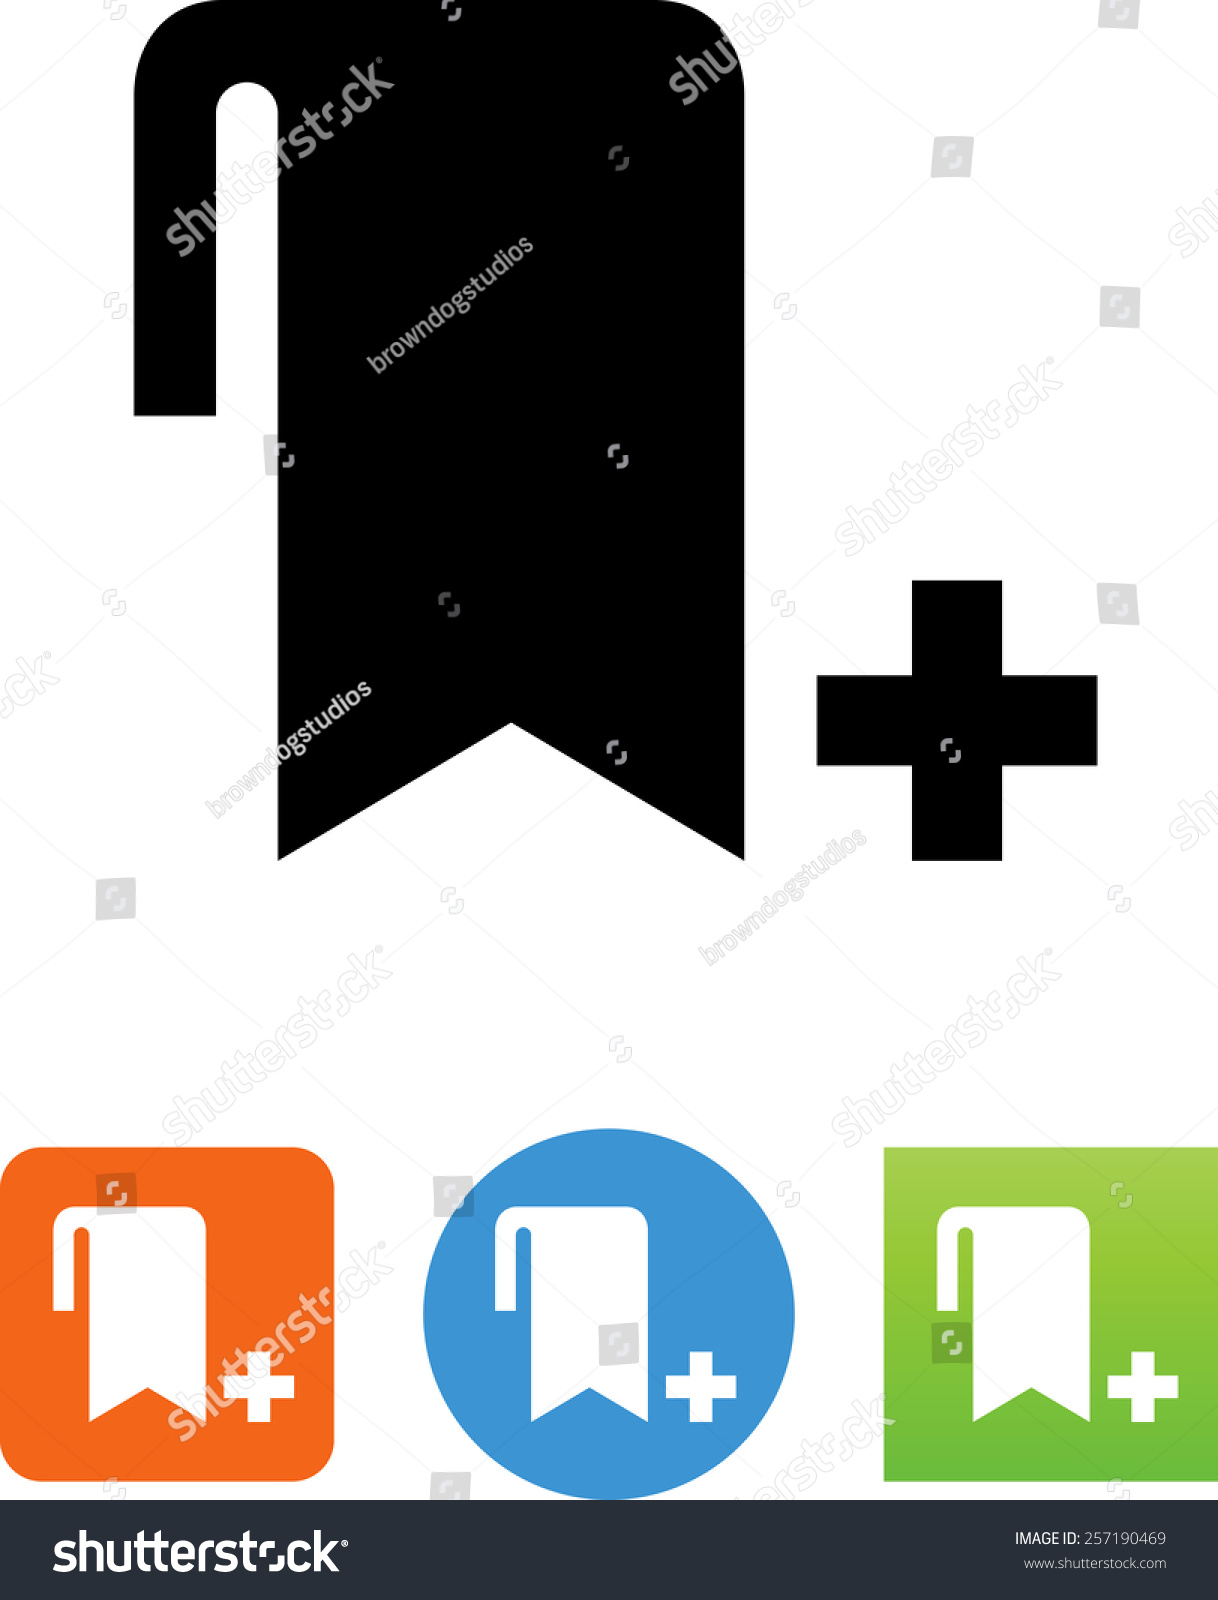 Book, bookmarked, education, read, reading, school, study icon 